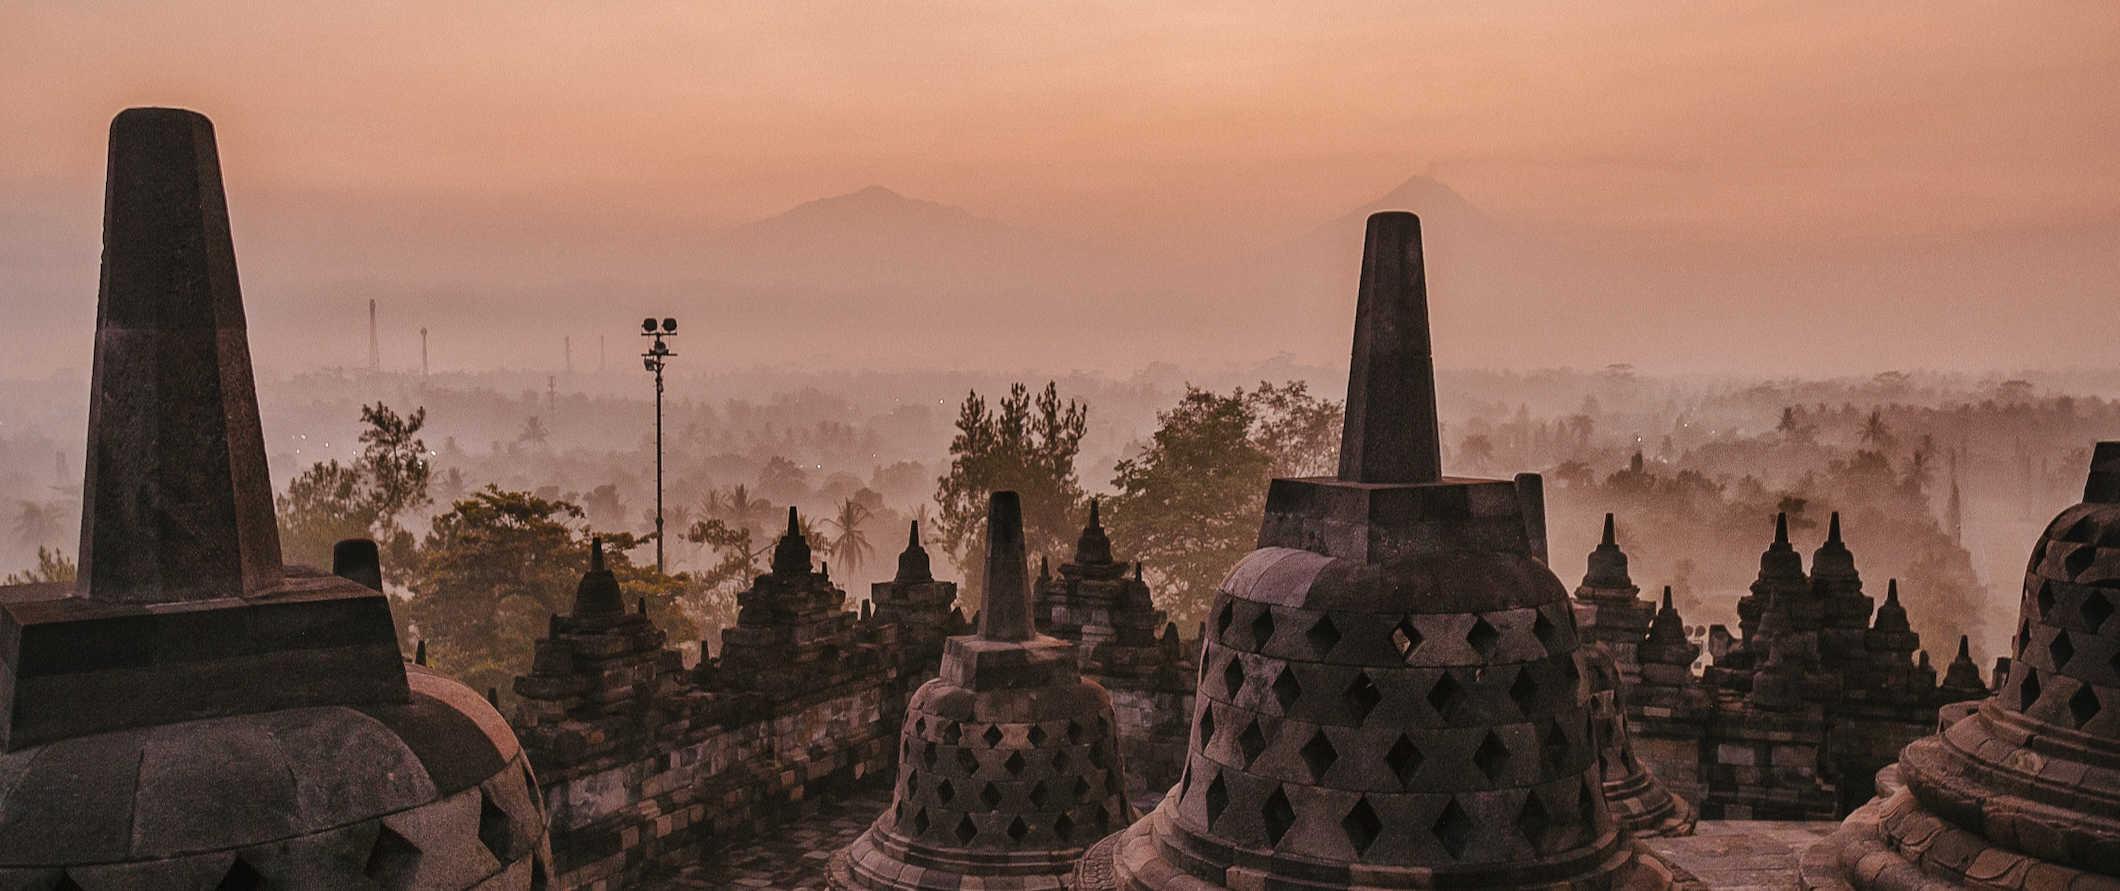 The ancient and iconic temple of Borobudur in beautiful Indonesia